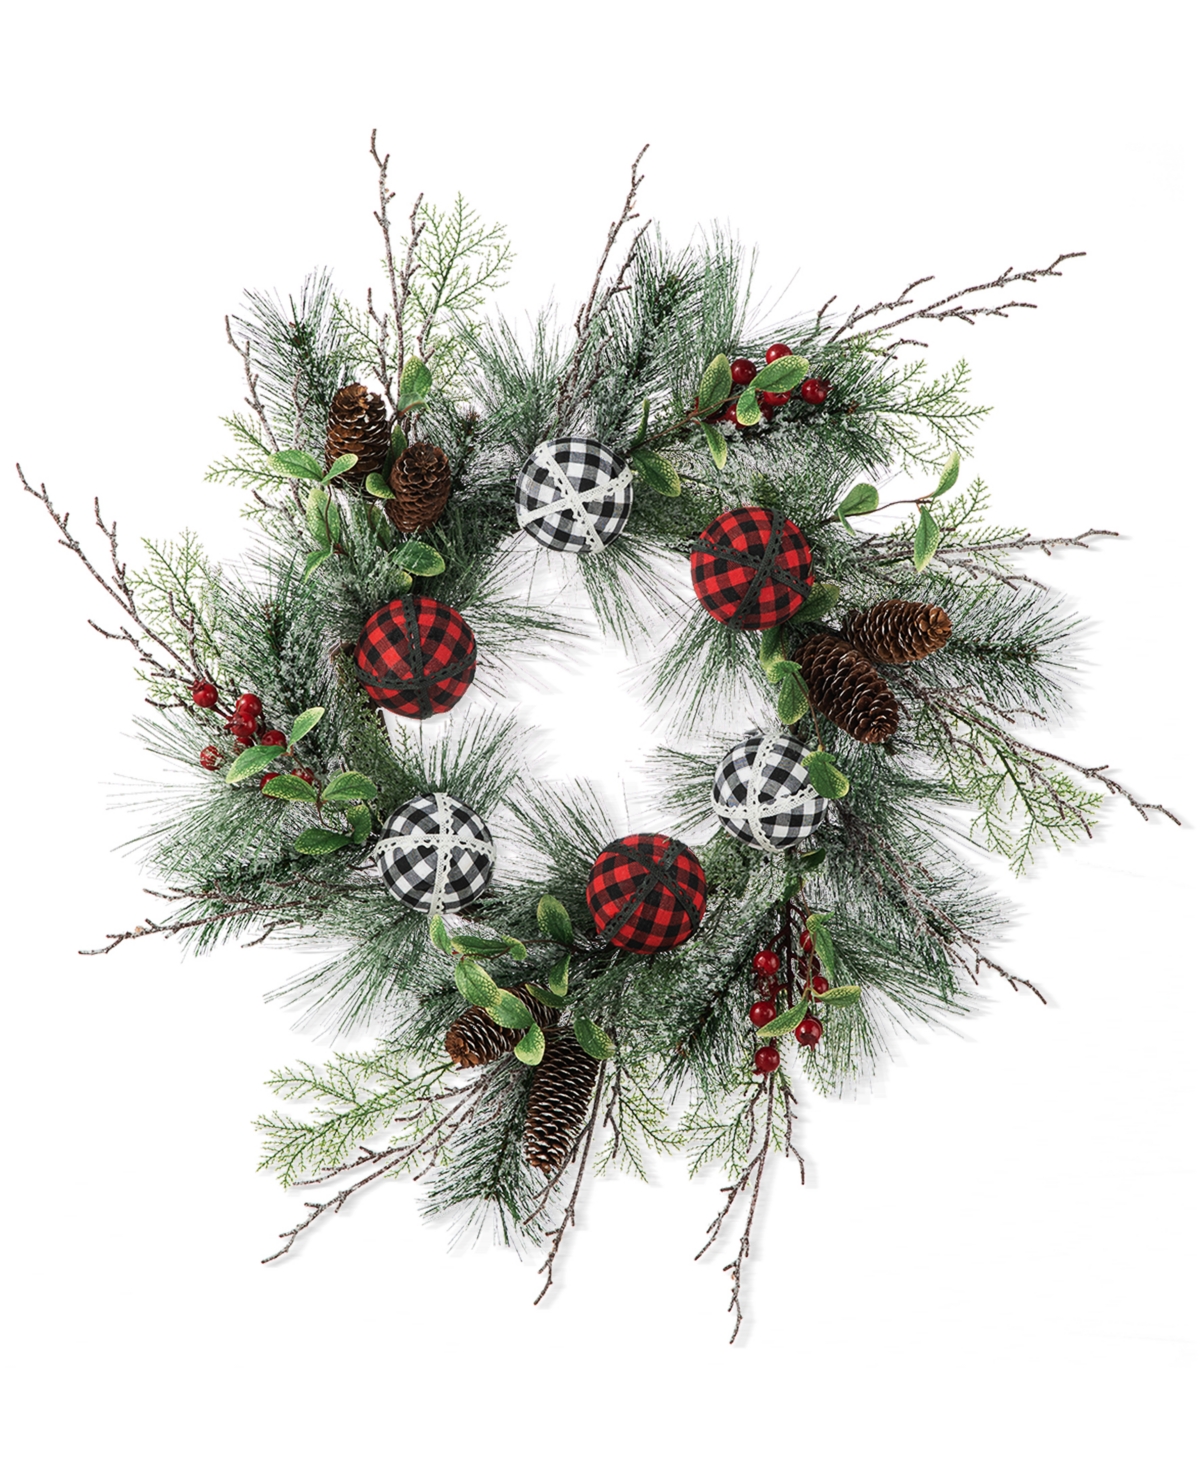 24" D Frosted Ornament, Berry Pinecone Wreath - Multi